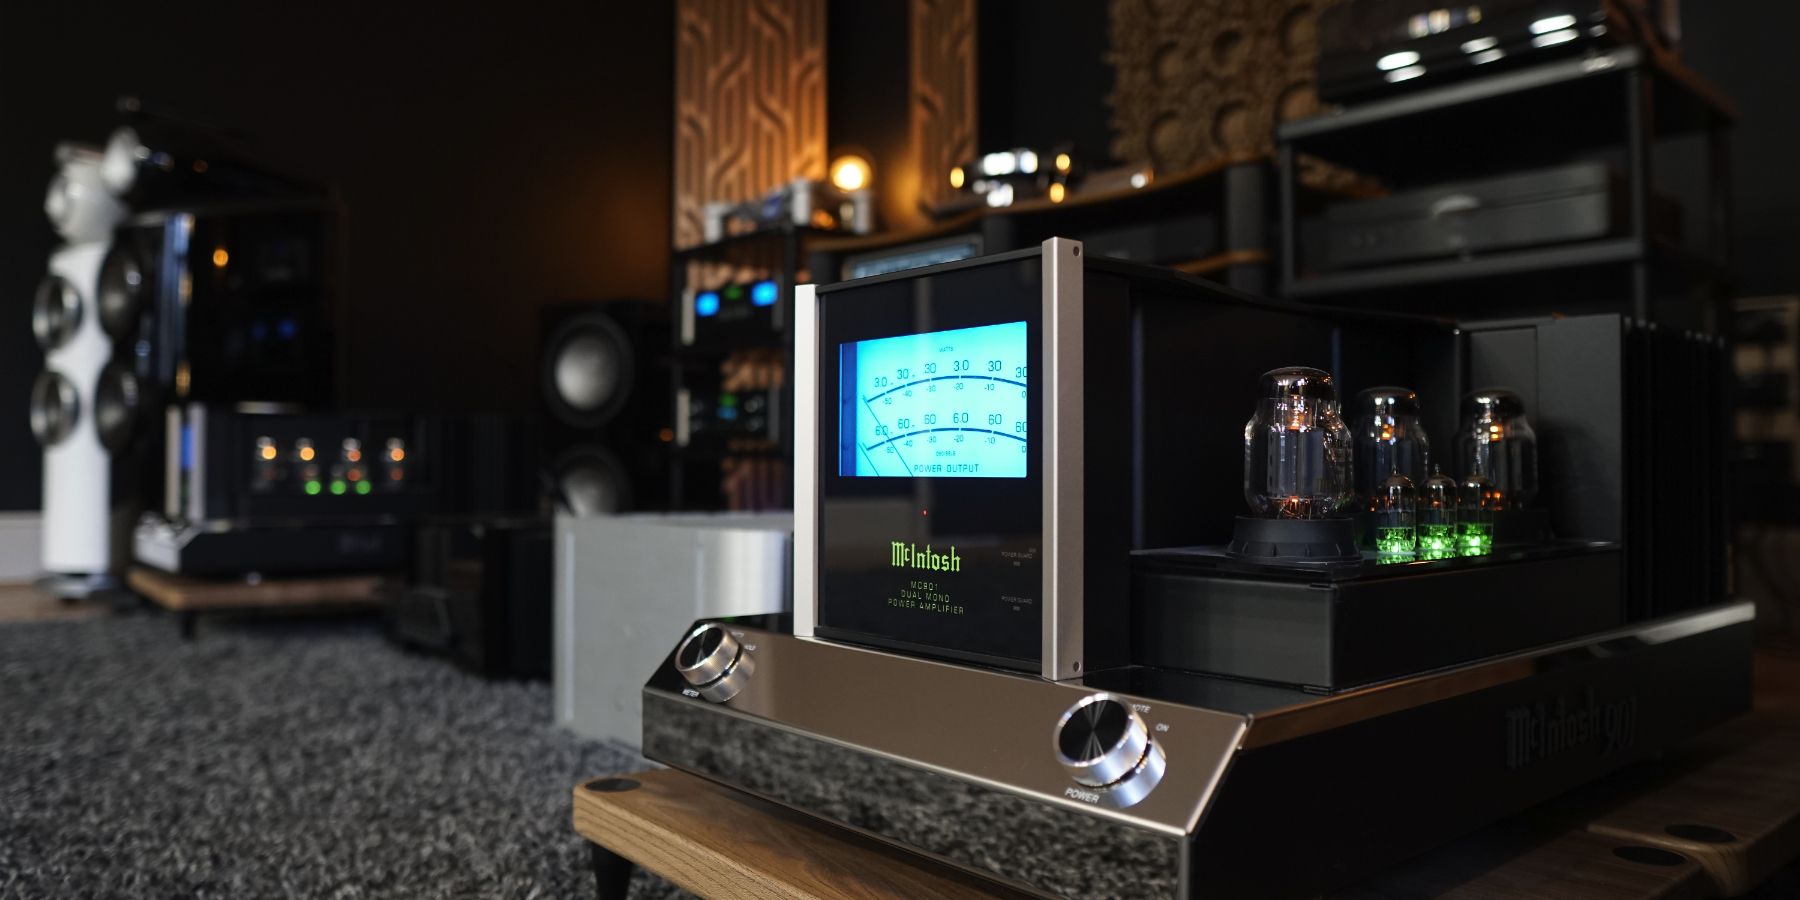 Experience McIntosh & Sonus Faber at Reference Audio: 27-28 May 2022